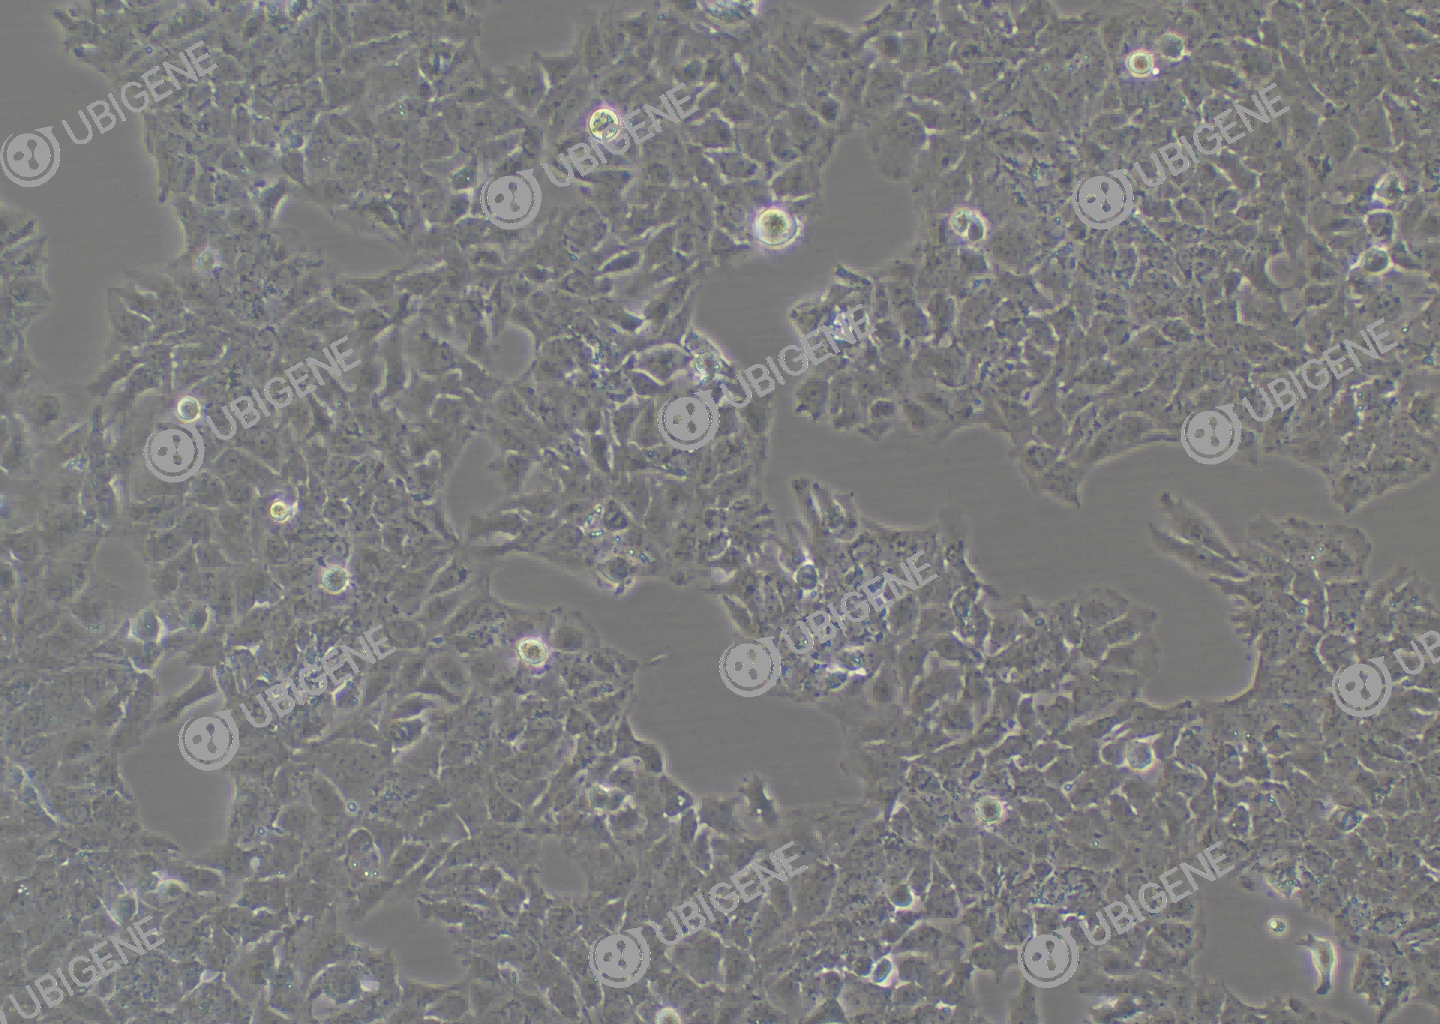 HuH-7 cell line Cultured cell morphology